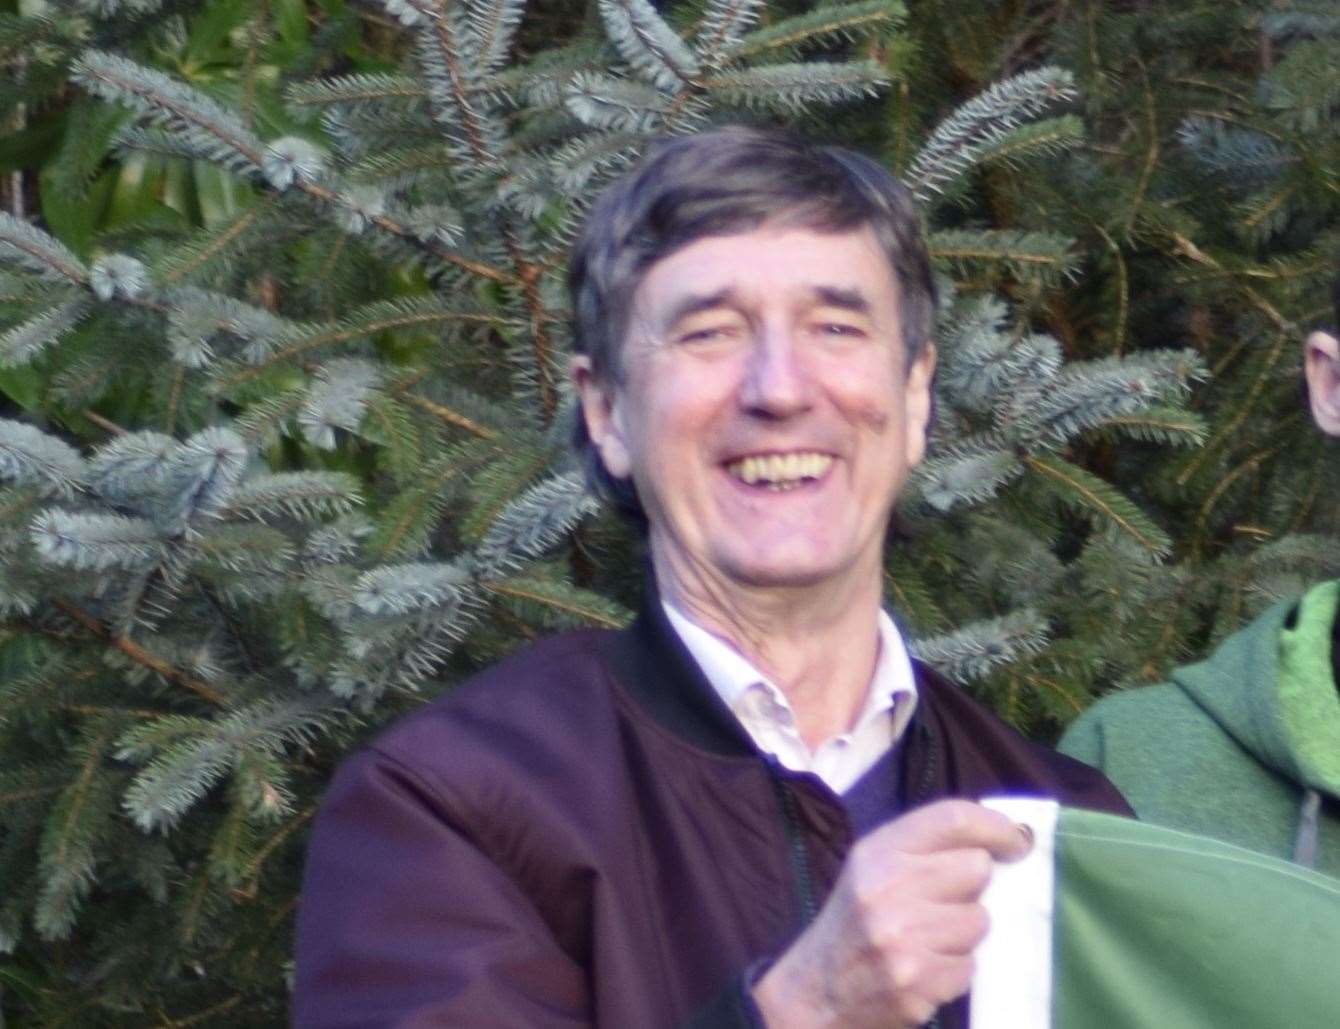 Chris Ballance, Co-convenor of the Highlands and Islands branch of the Scottish Greens